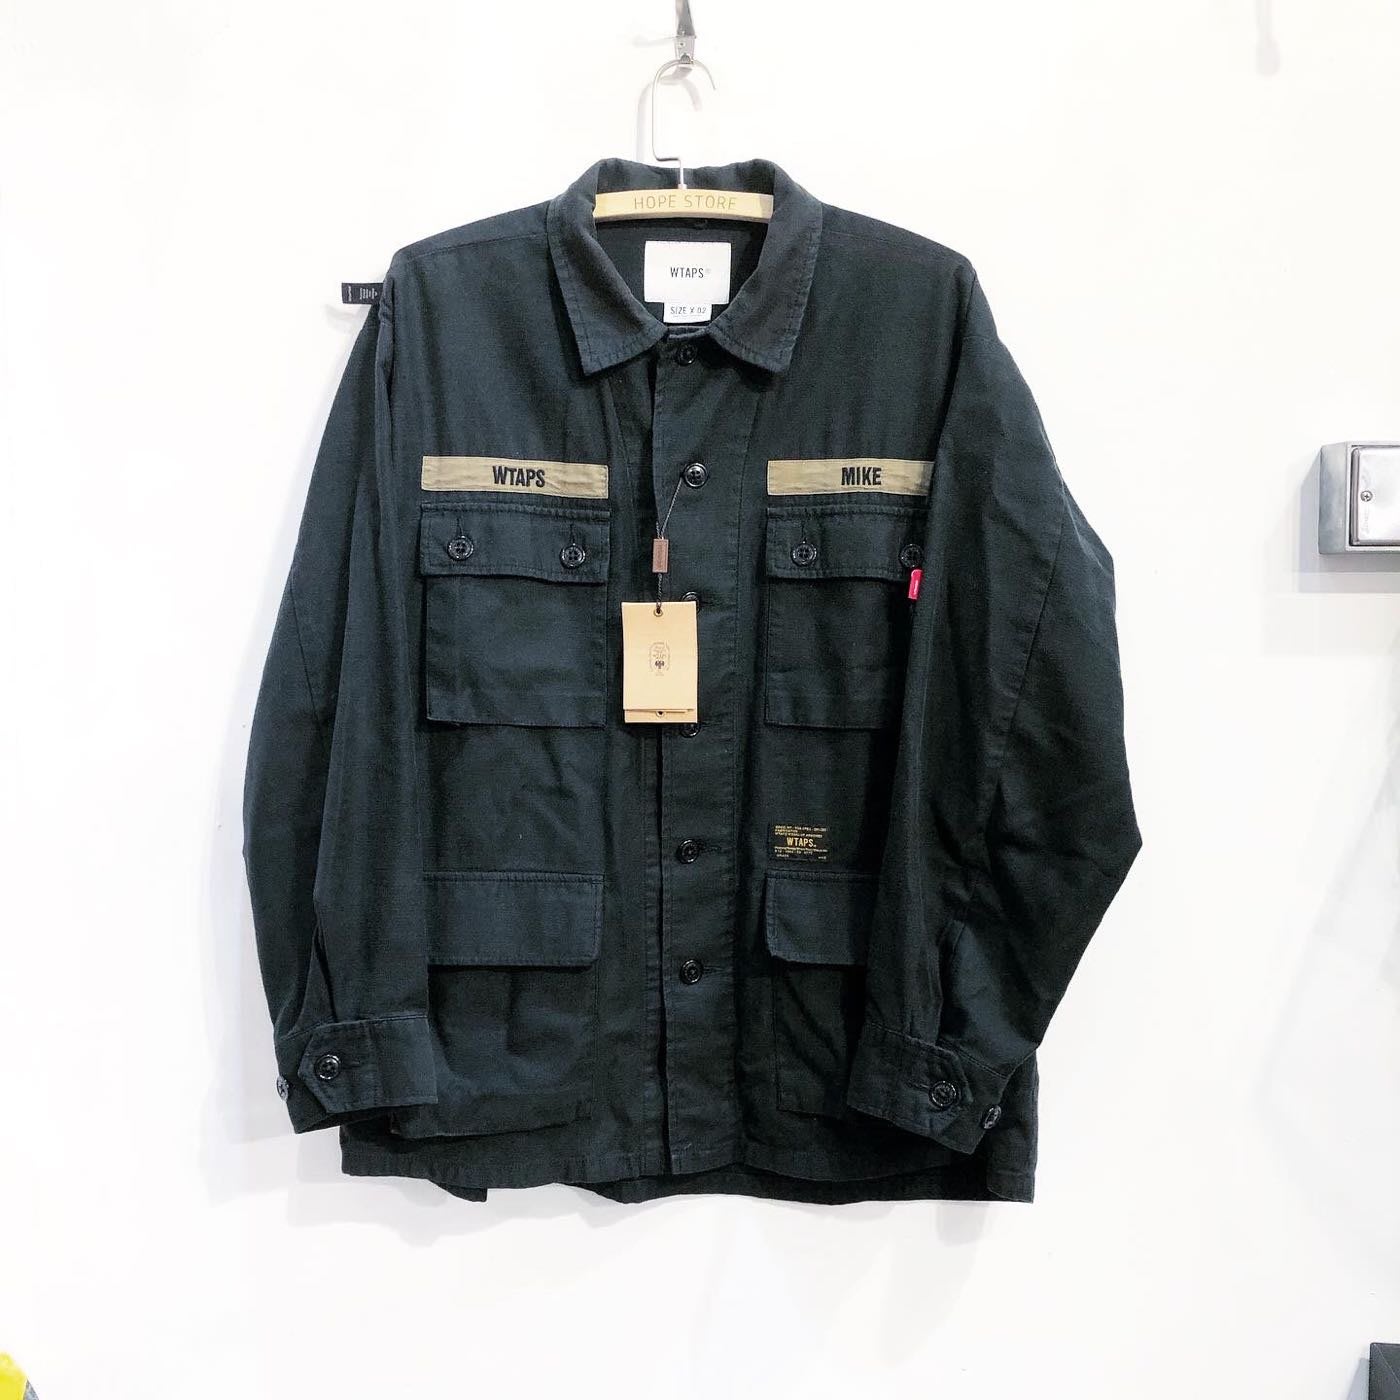 XL20AW WTAPS JUNGLE / LS / NYCO. RIPSTOP